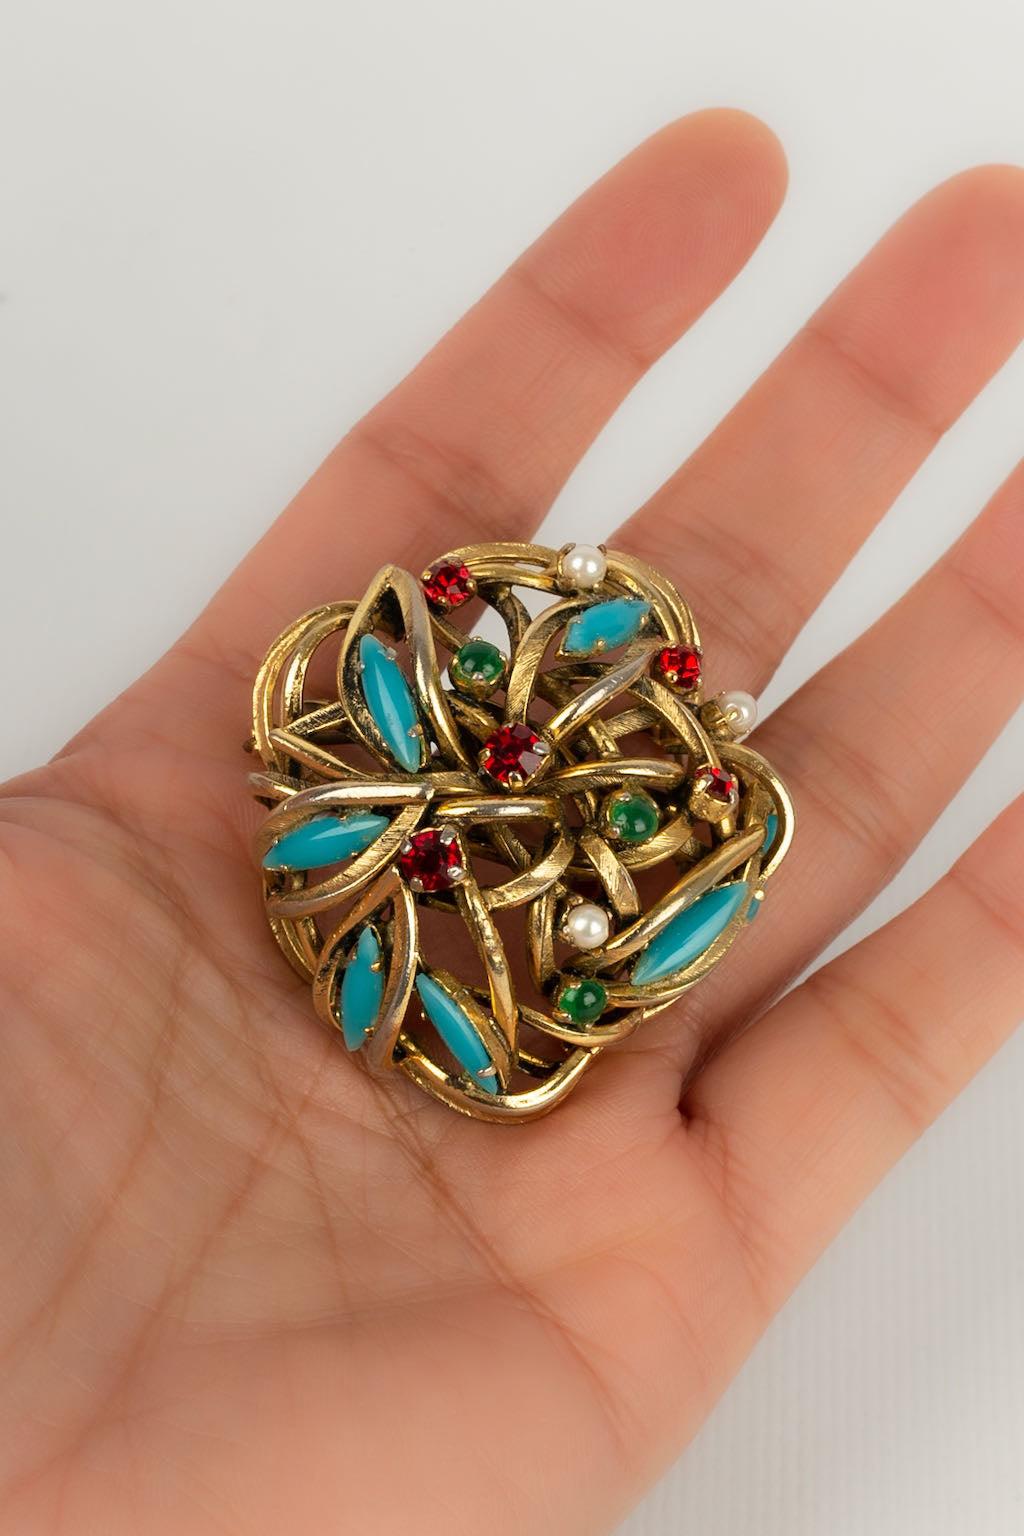 Dior - (Made in Germany) Brooch in gold metal and rhinestones. Collection 1962.

Additional information:
Condition: Very good condition
Dimensions: Diameter : 4.5 cm
Period: 20th Century

Seller Reference: BR47
